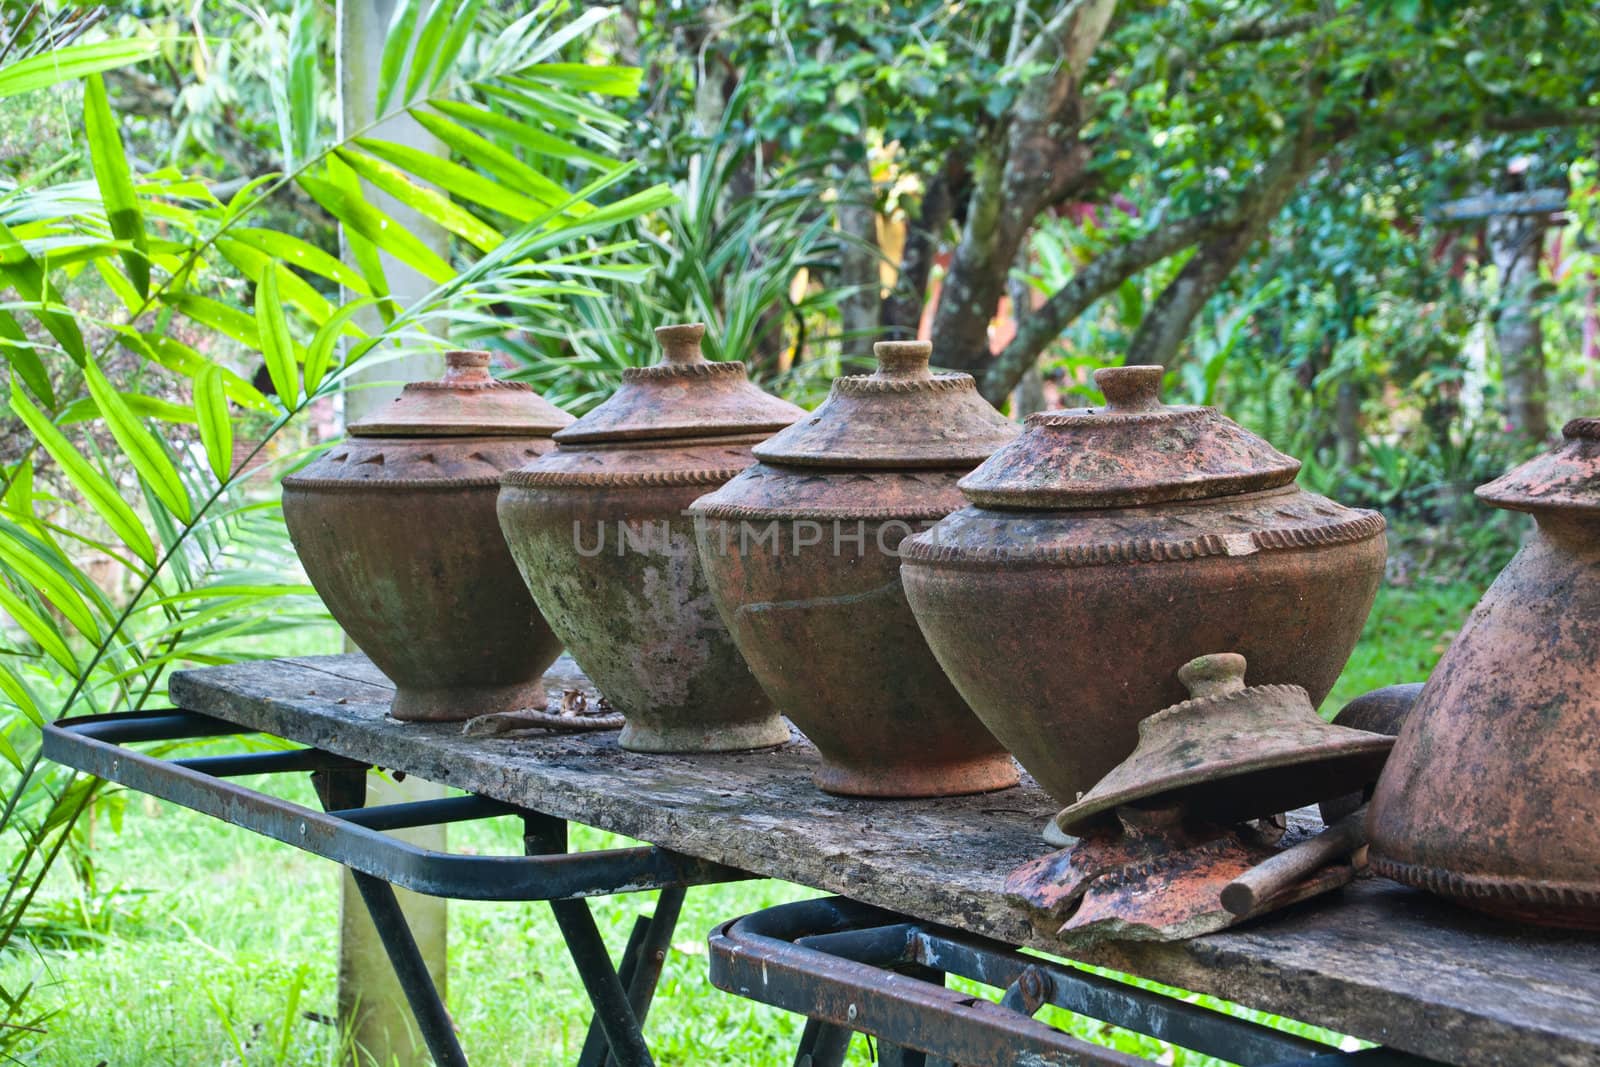 Clay pot for drinking water. Northern Thailand.